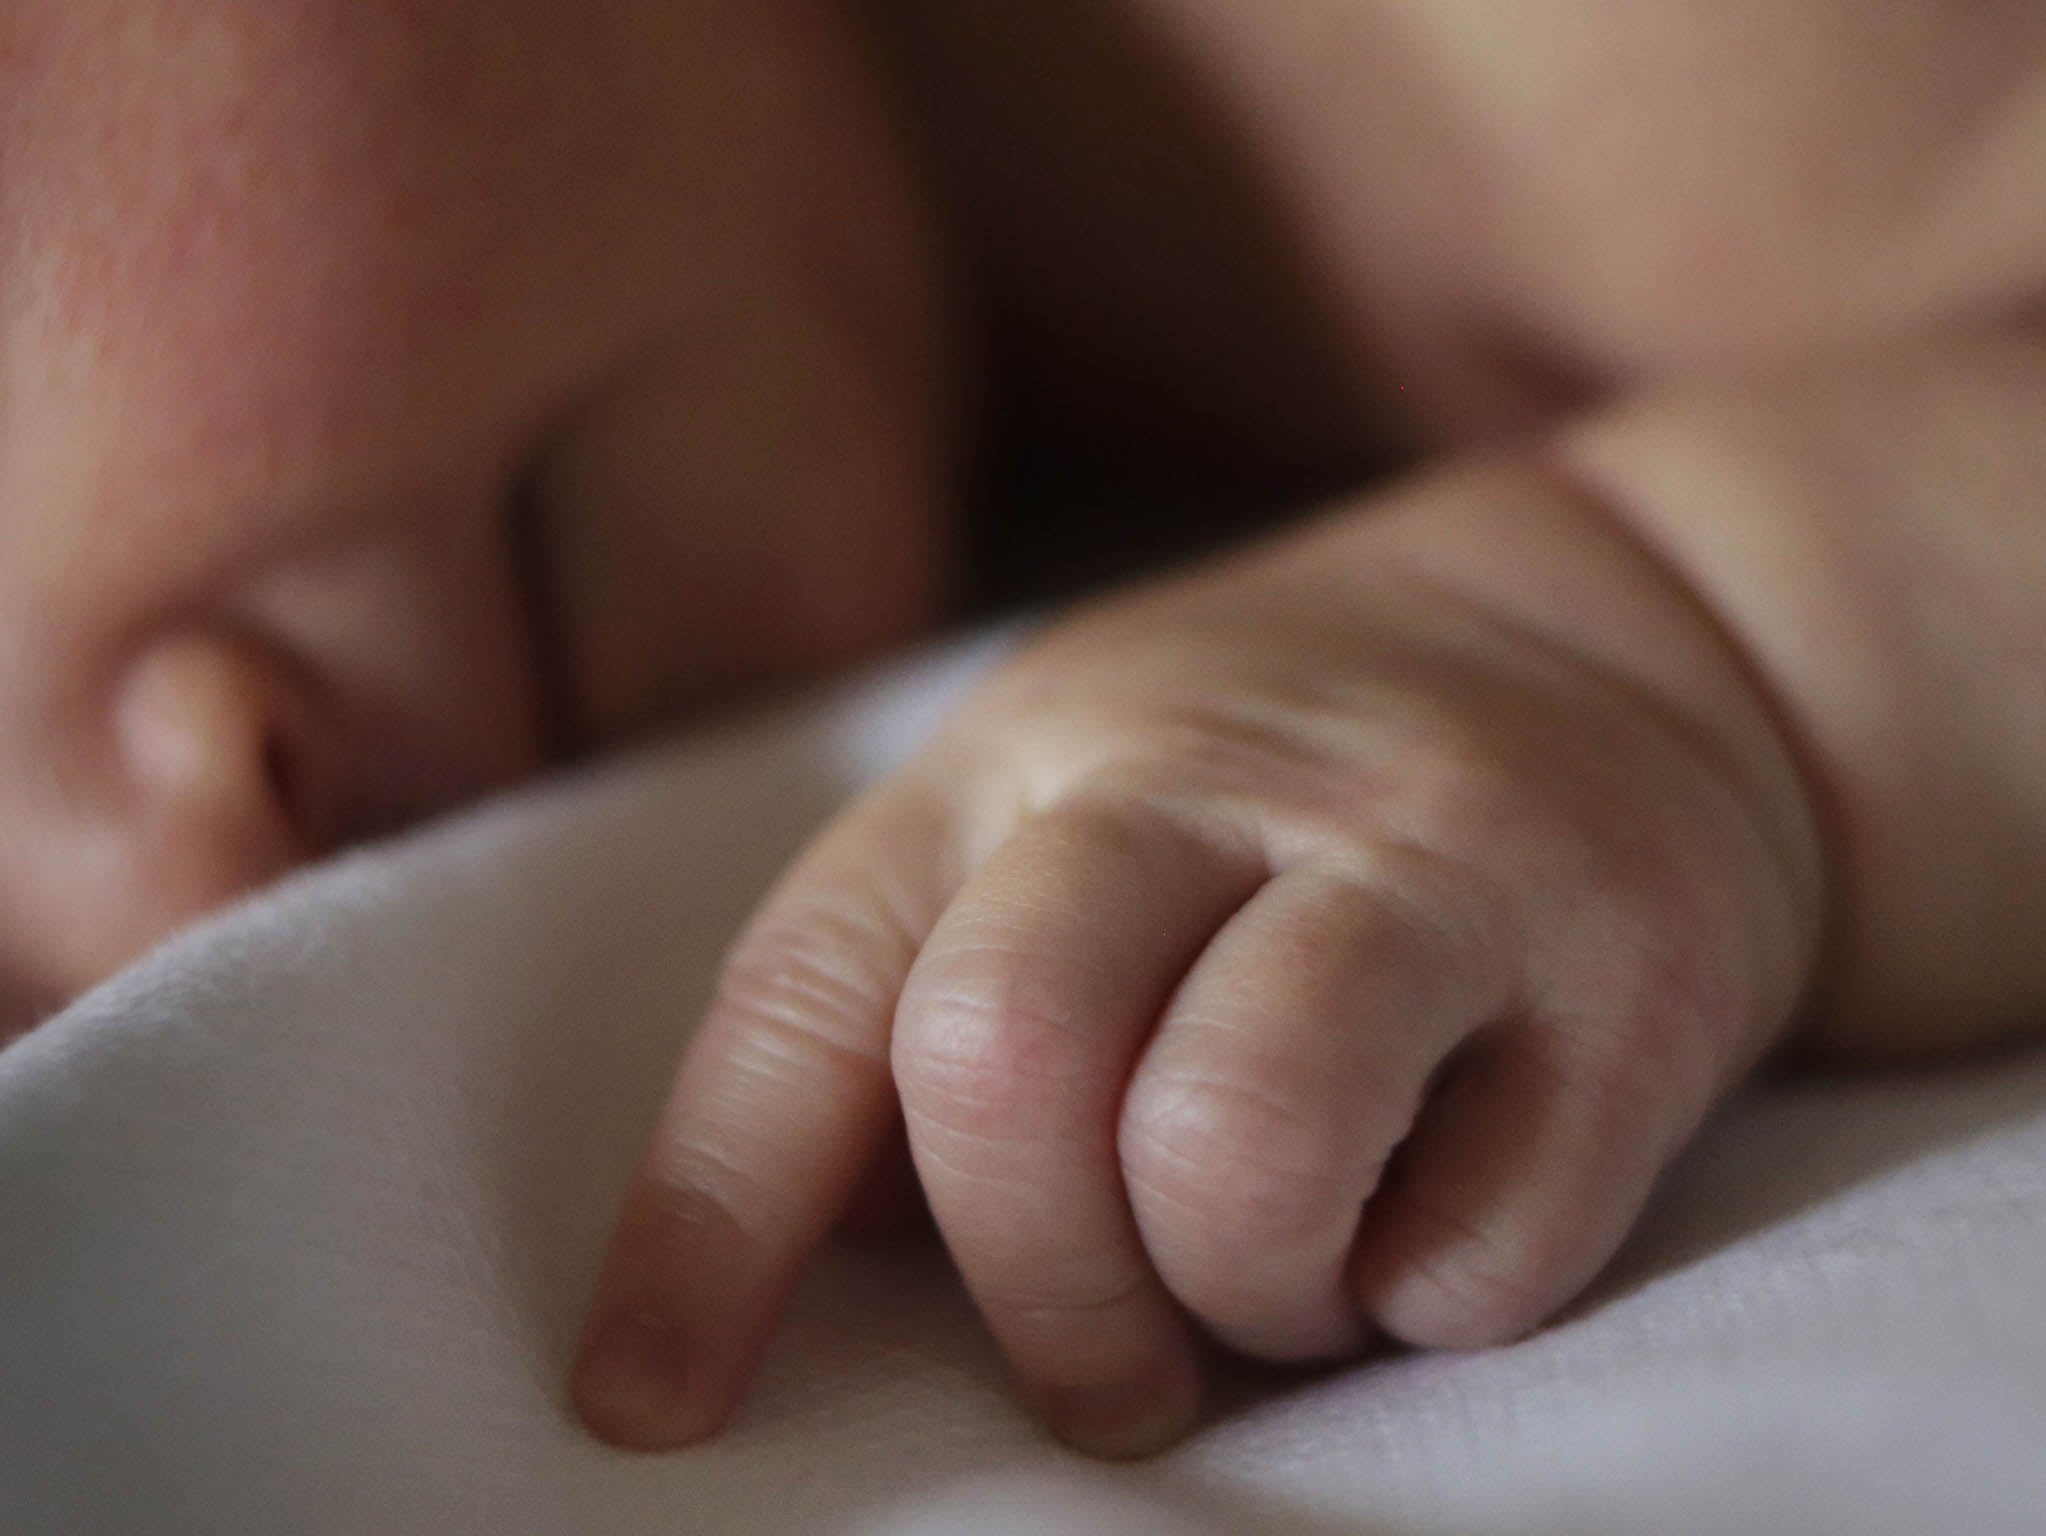 The number of newborn babies taken into care in England has soared in recent year